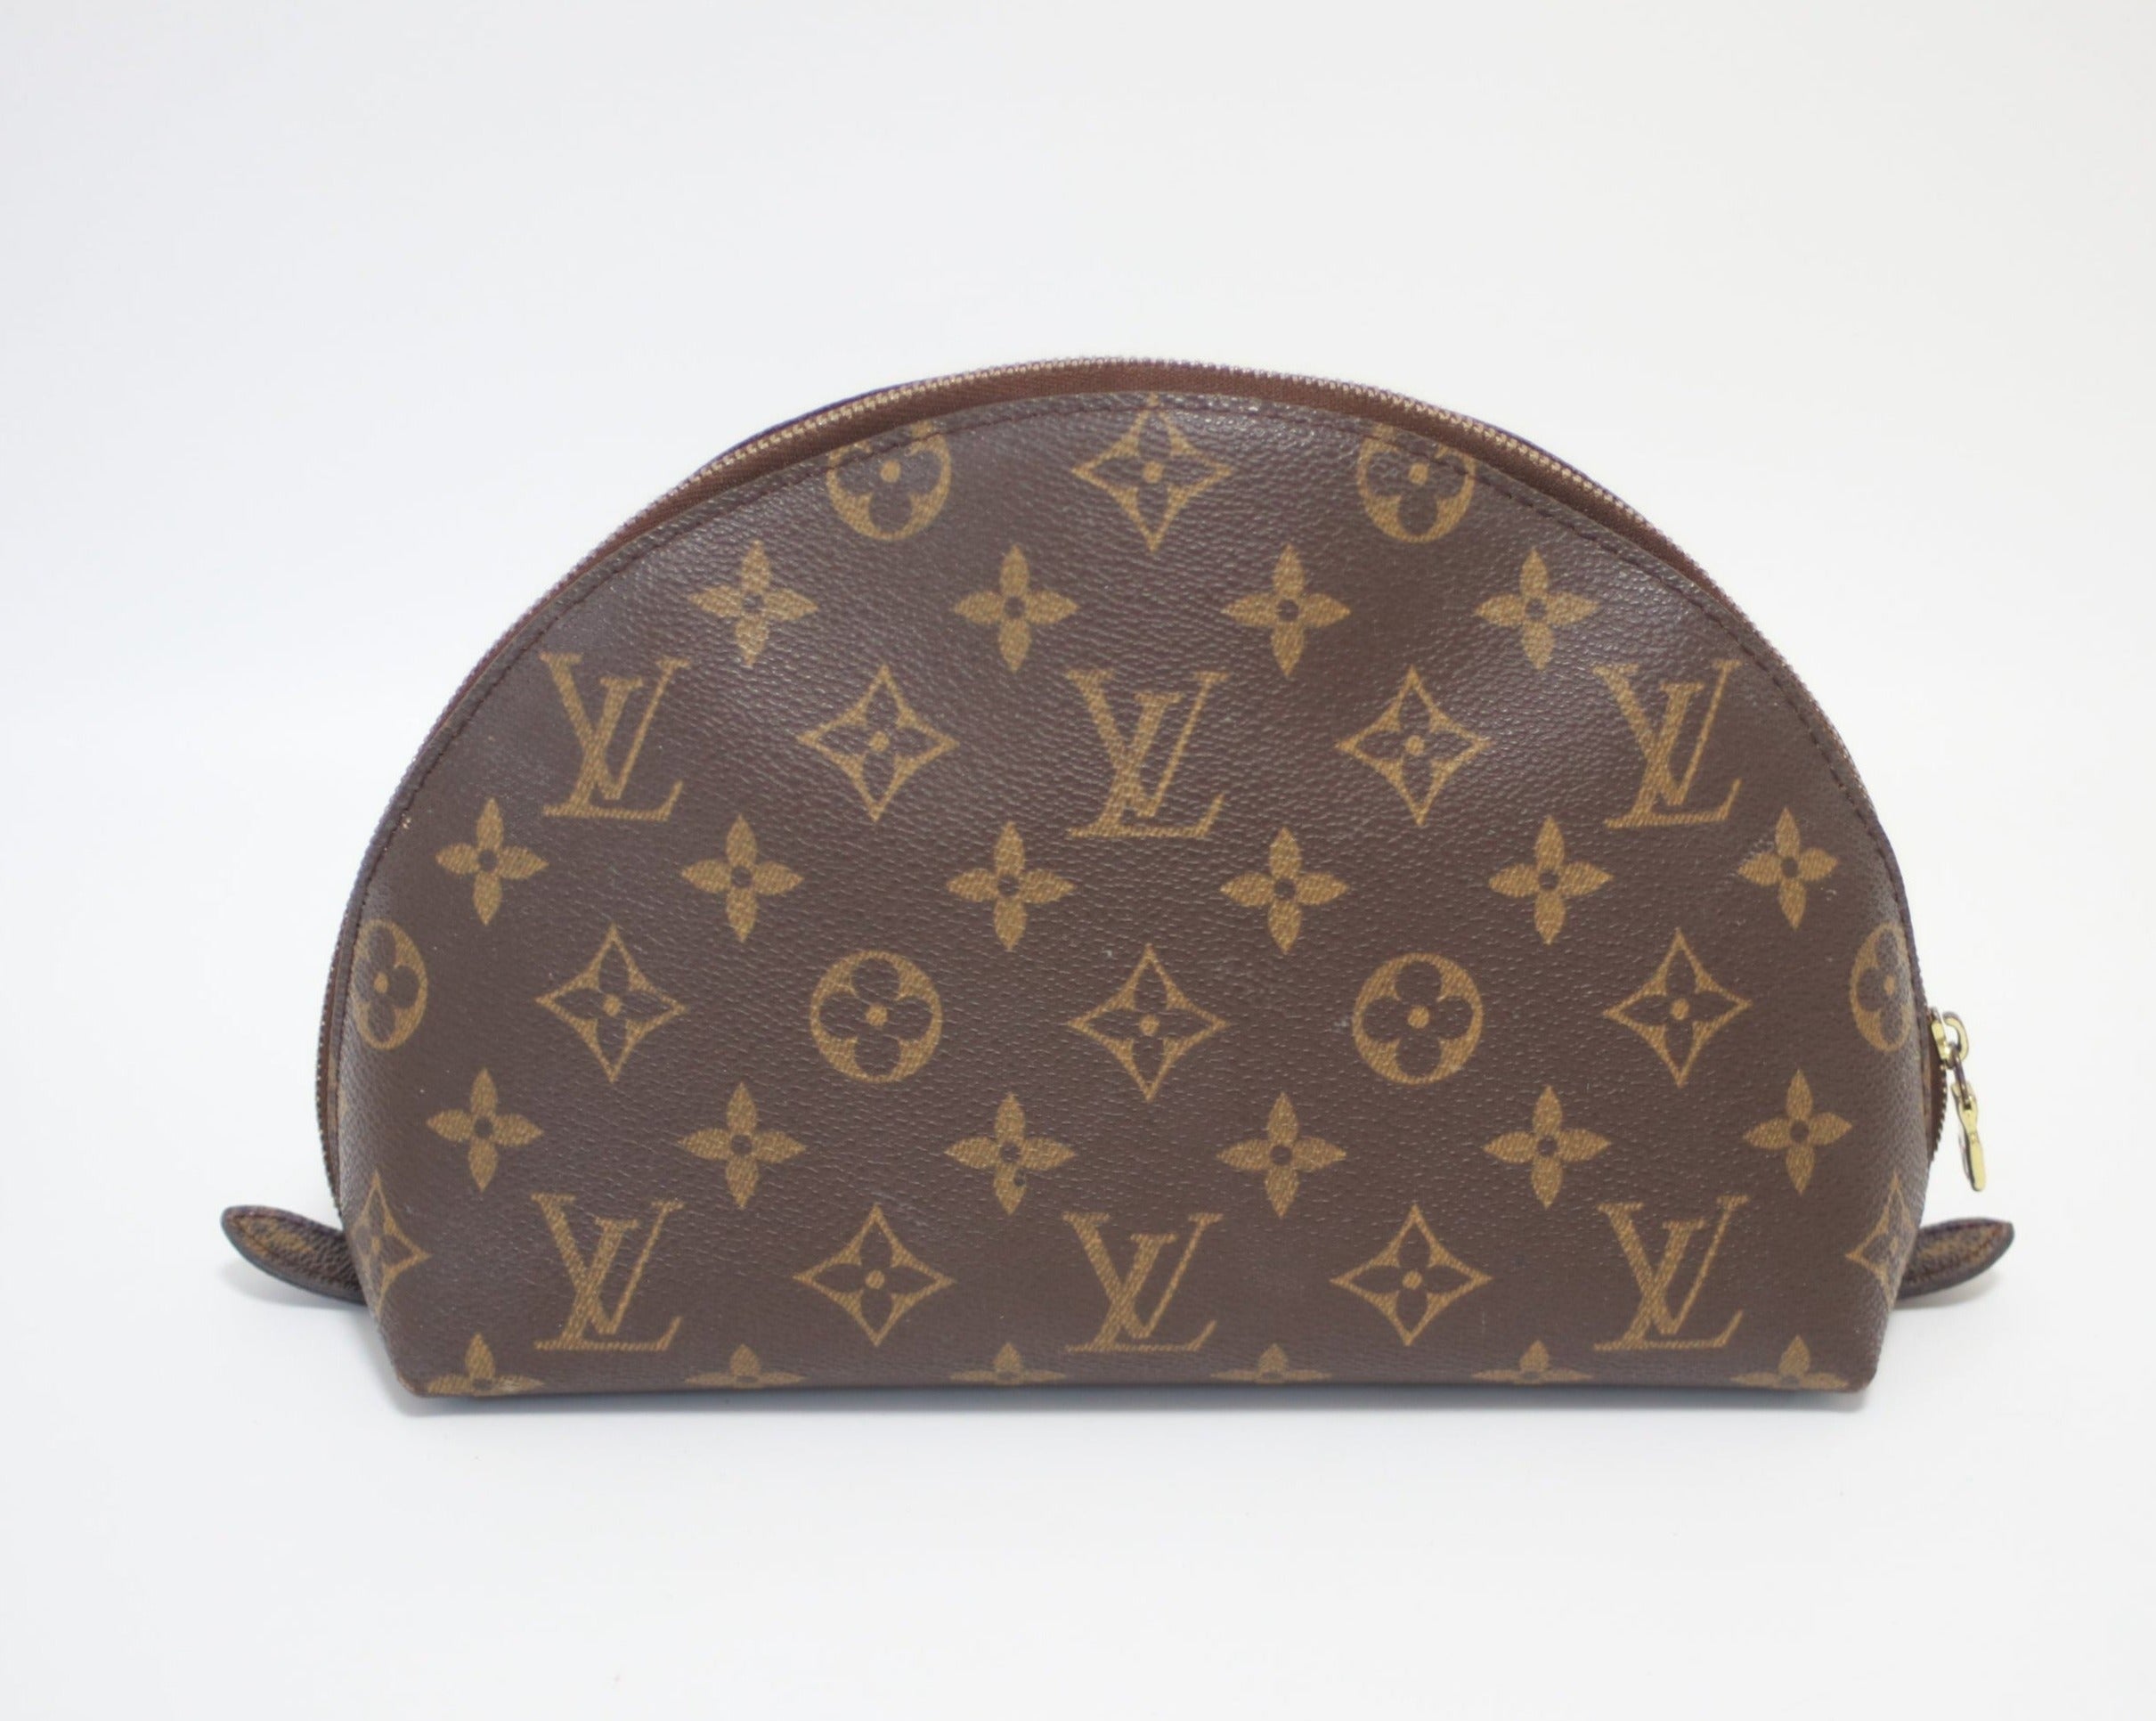 LOUIS VUITTON USED